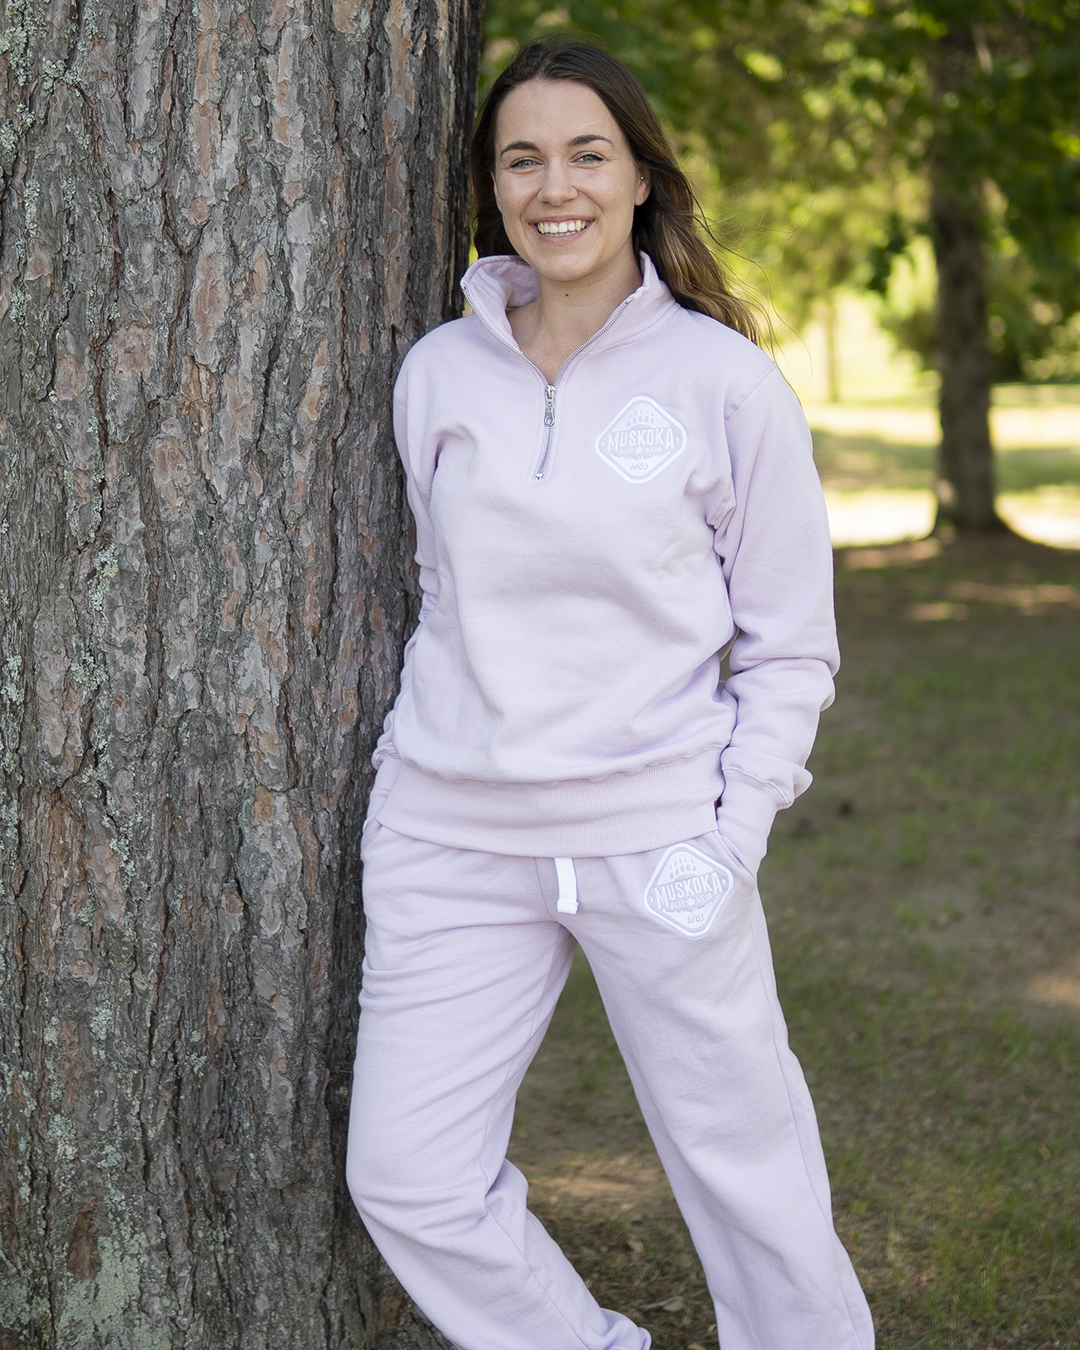 Canadian Influencer Kresson wearing a Soft Violet Quarter Zip and matching Soft Violet MBW Camp Pants (sweatpants) is leaning against a tree outside and smiling.